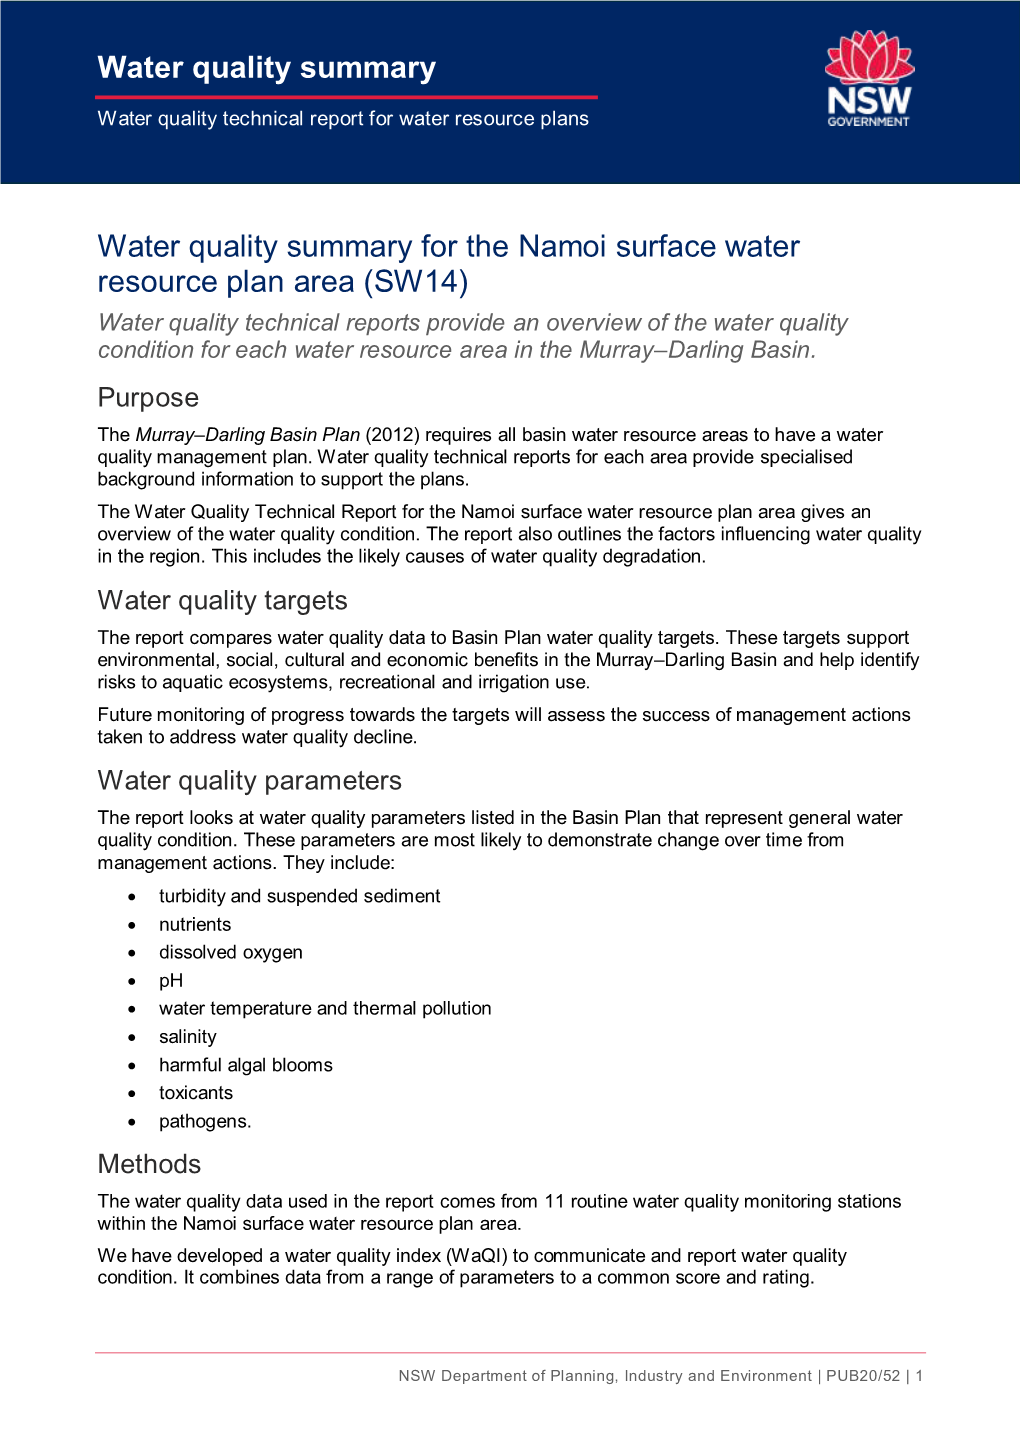 Water Quality Summary for the Namoi Surface Water Resource Plan Area (SW14)